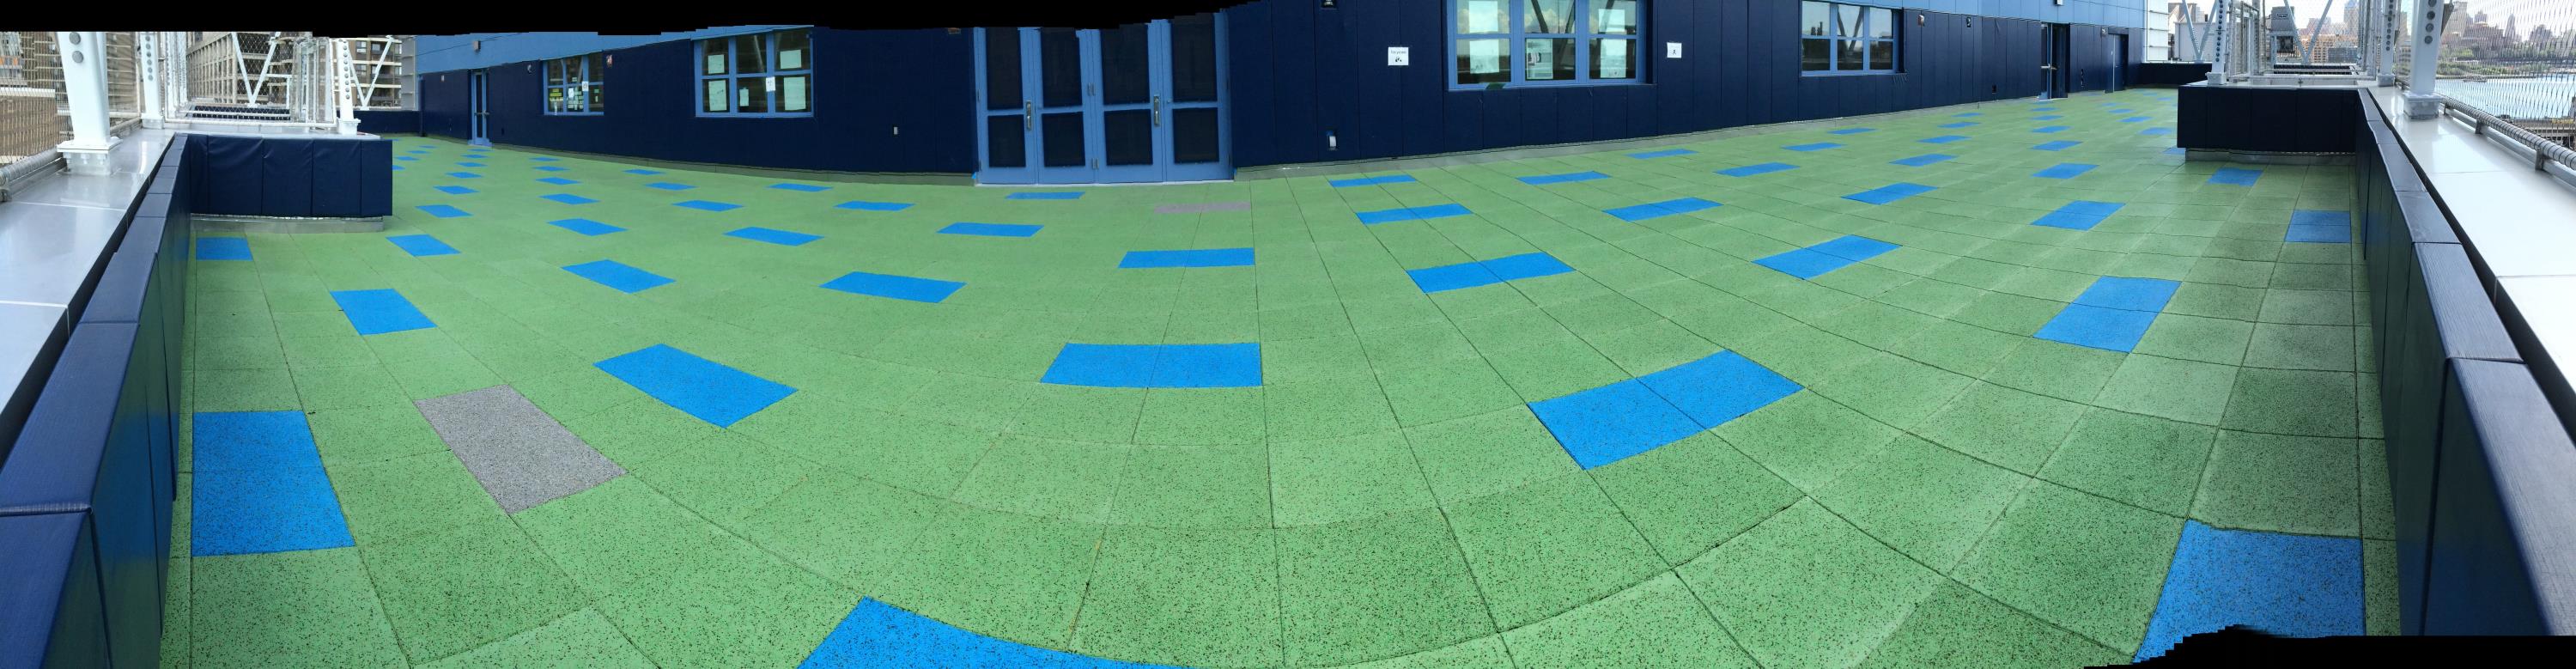 UNITY'S Interlocking Rooftop Playground Tiles Using Solid TPV Top Tiles